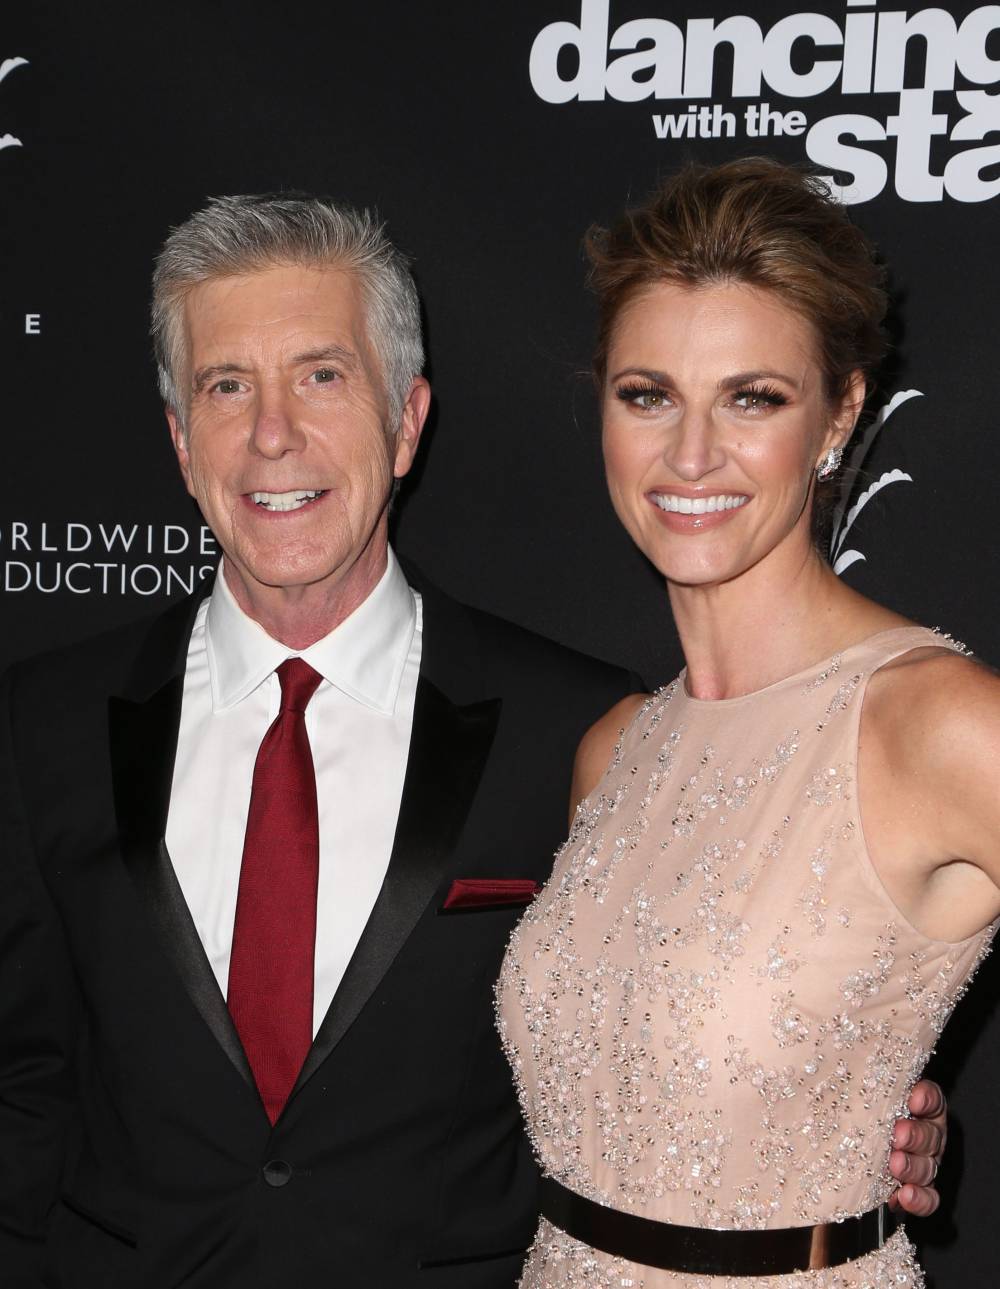 Tom Bergeron Says He’s Been Axed as Host of ‘Dancing With the Stars’